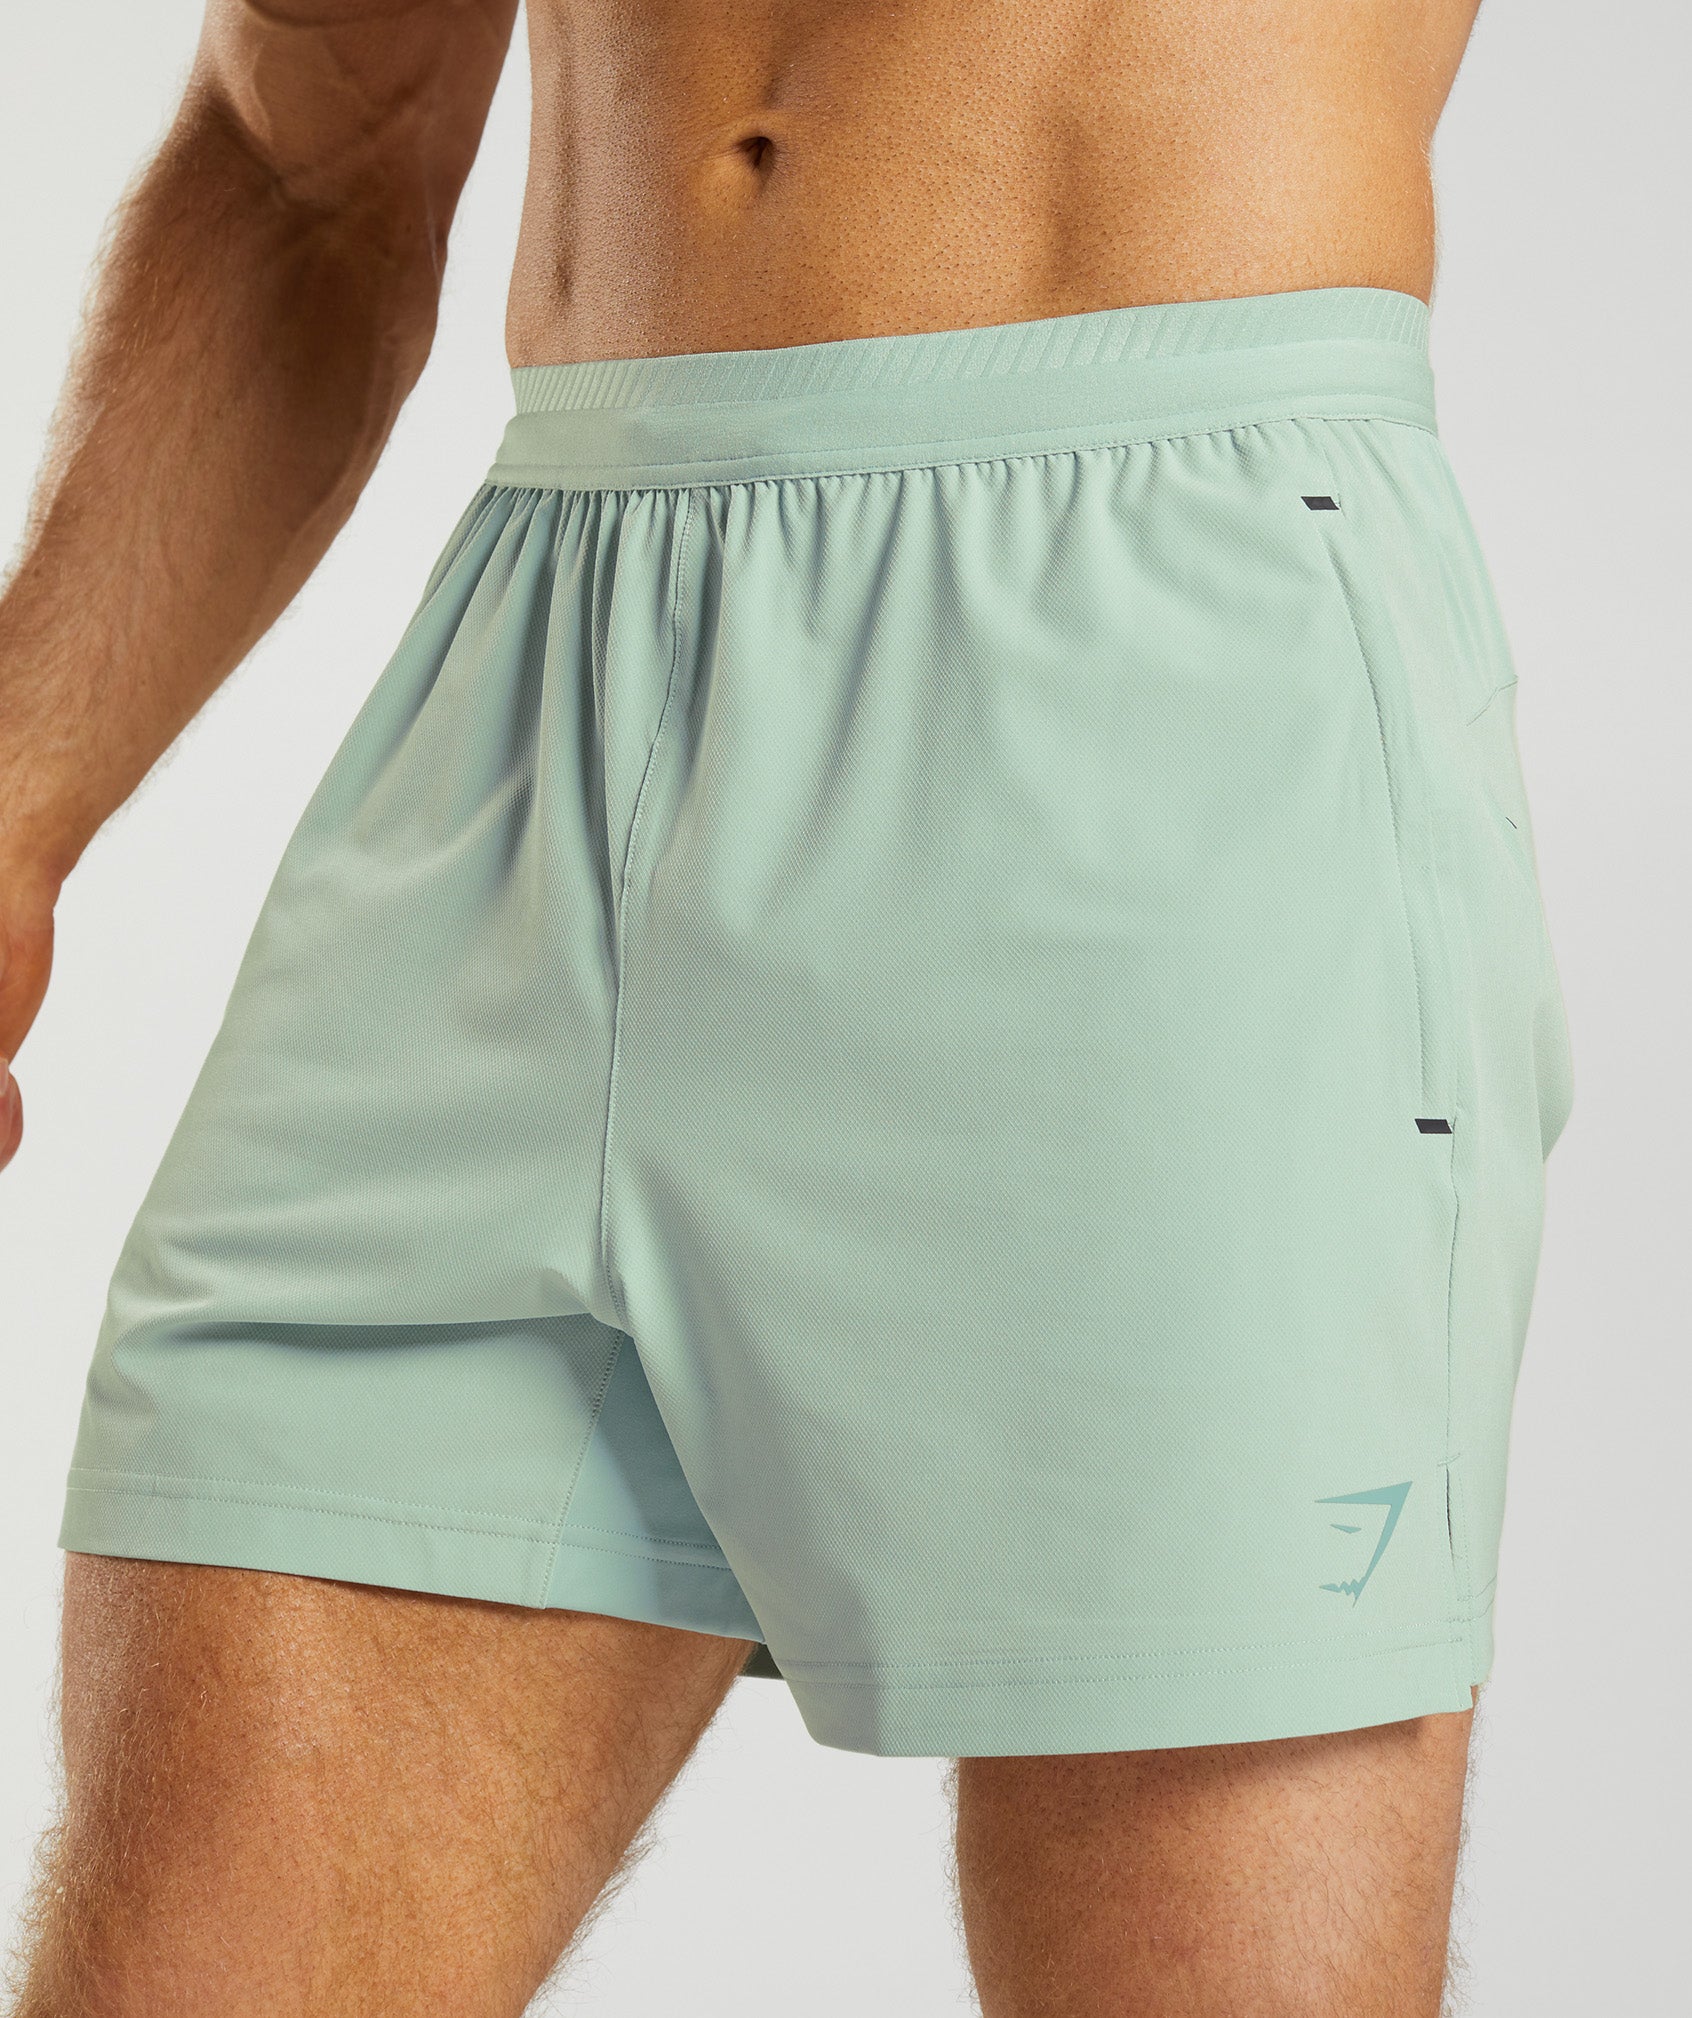 Apex 5" Hybrid Shorts in Frost Teal - view 6